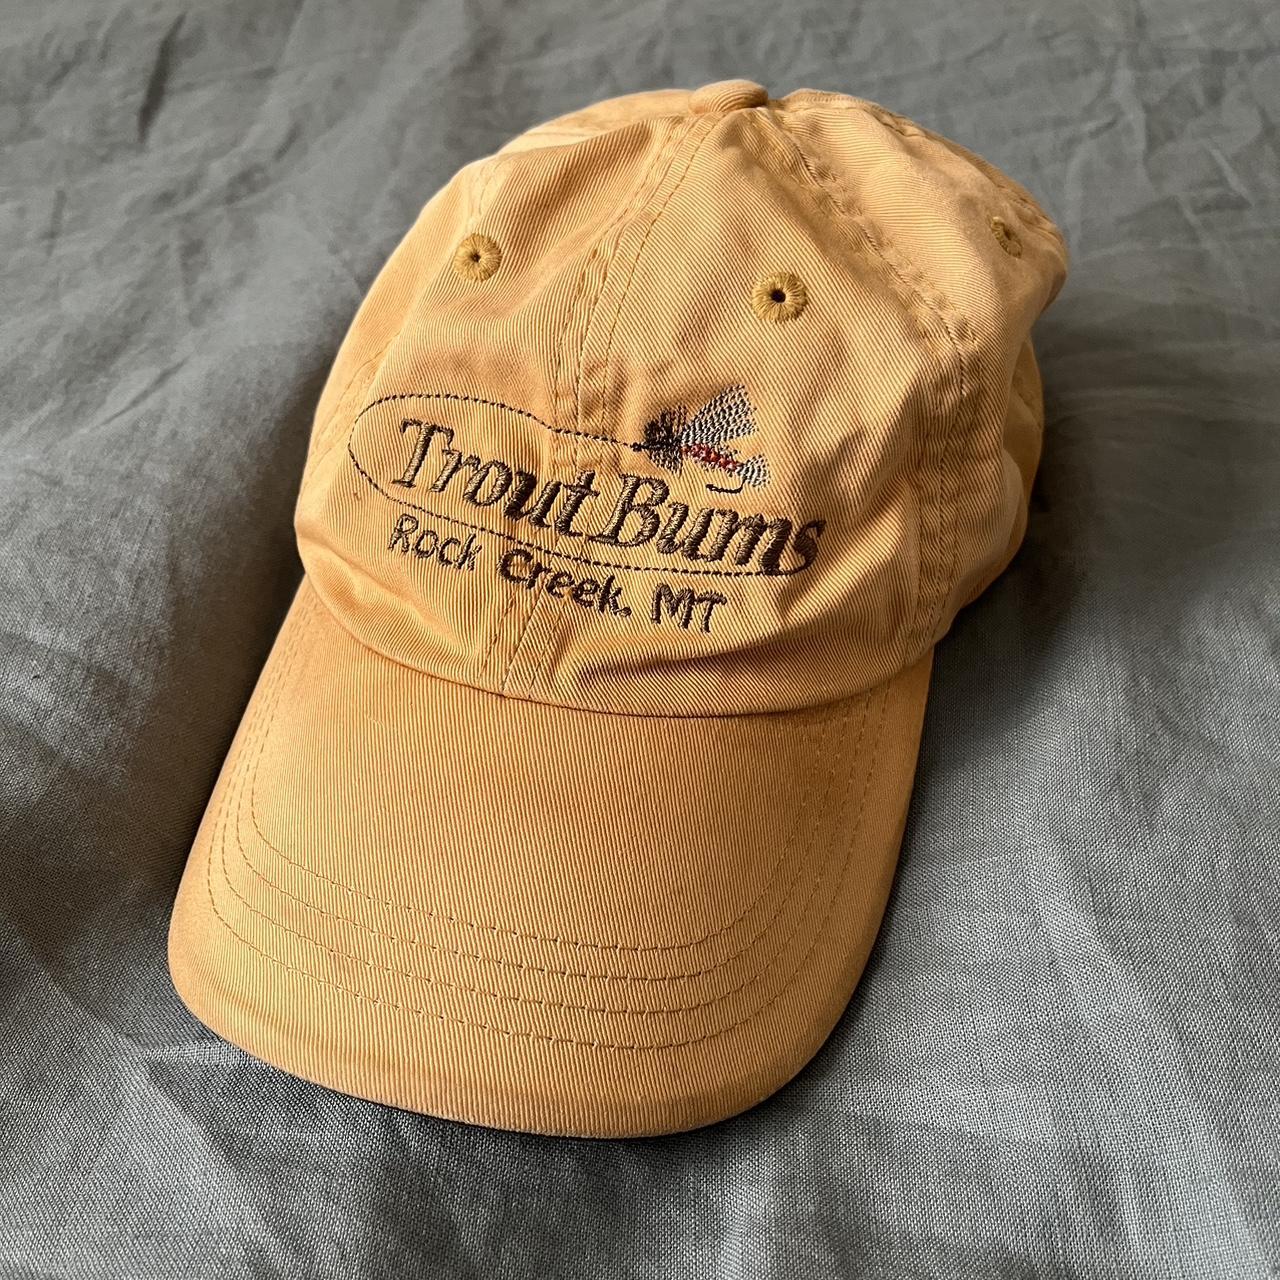 Vintage Fly-Fishing Hat - “Trout Bums”, Vintage look